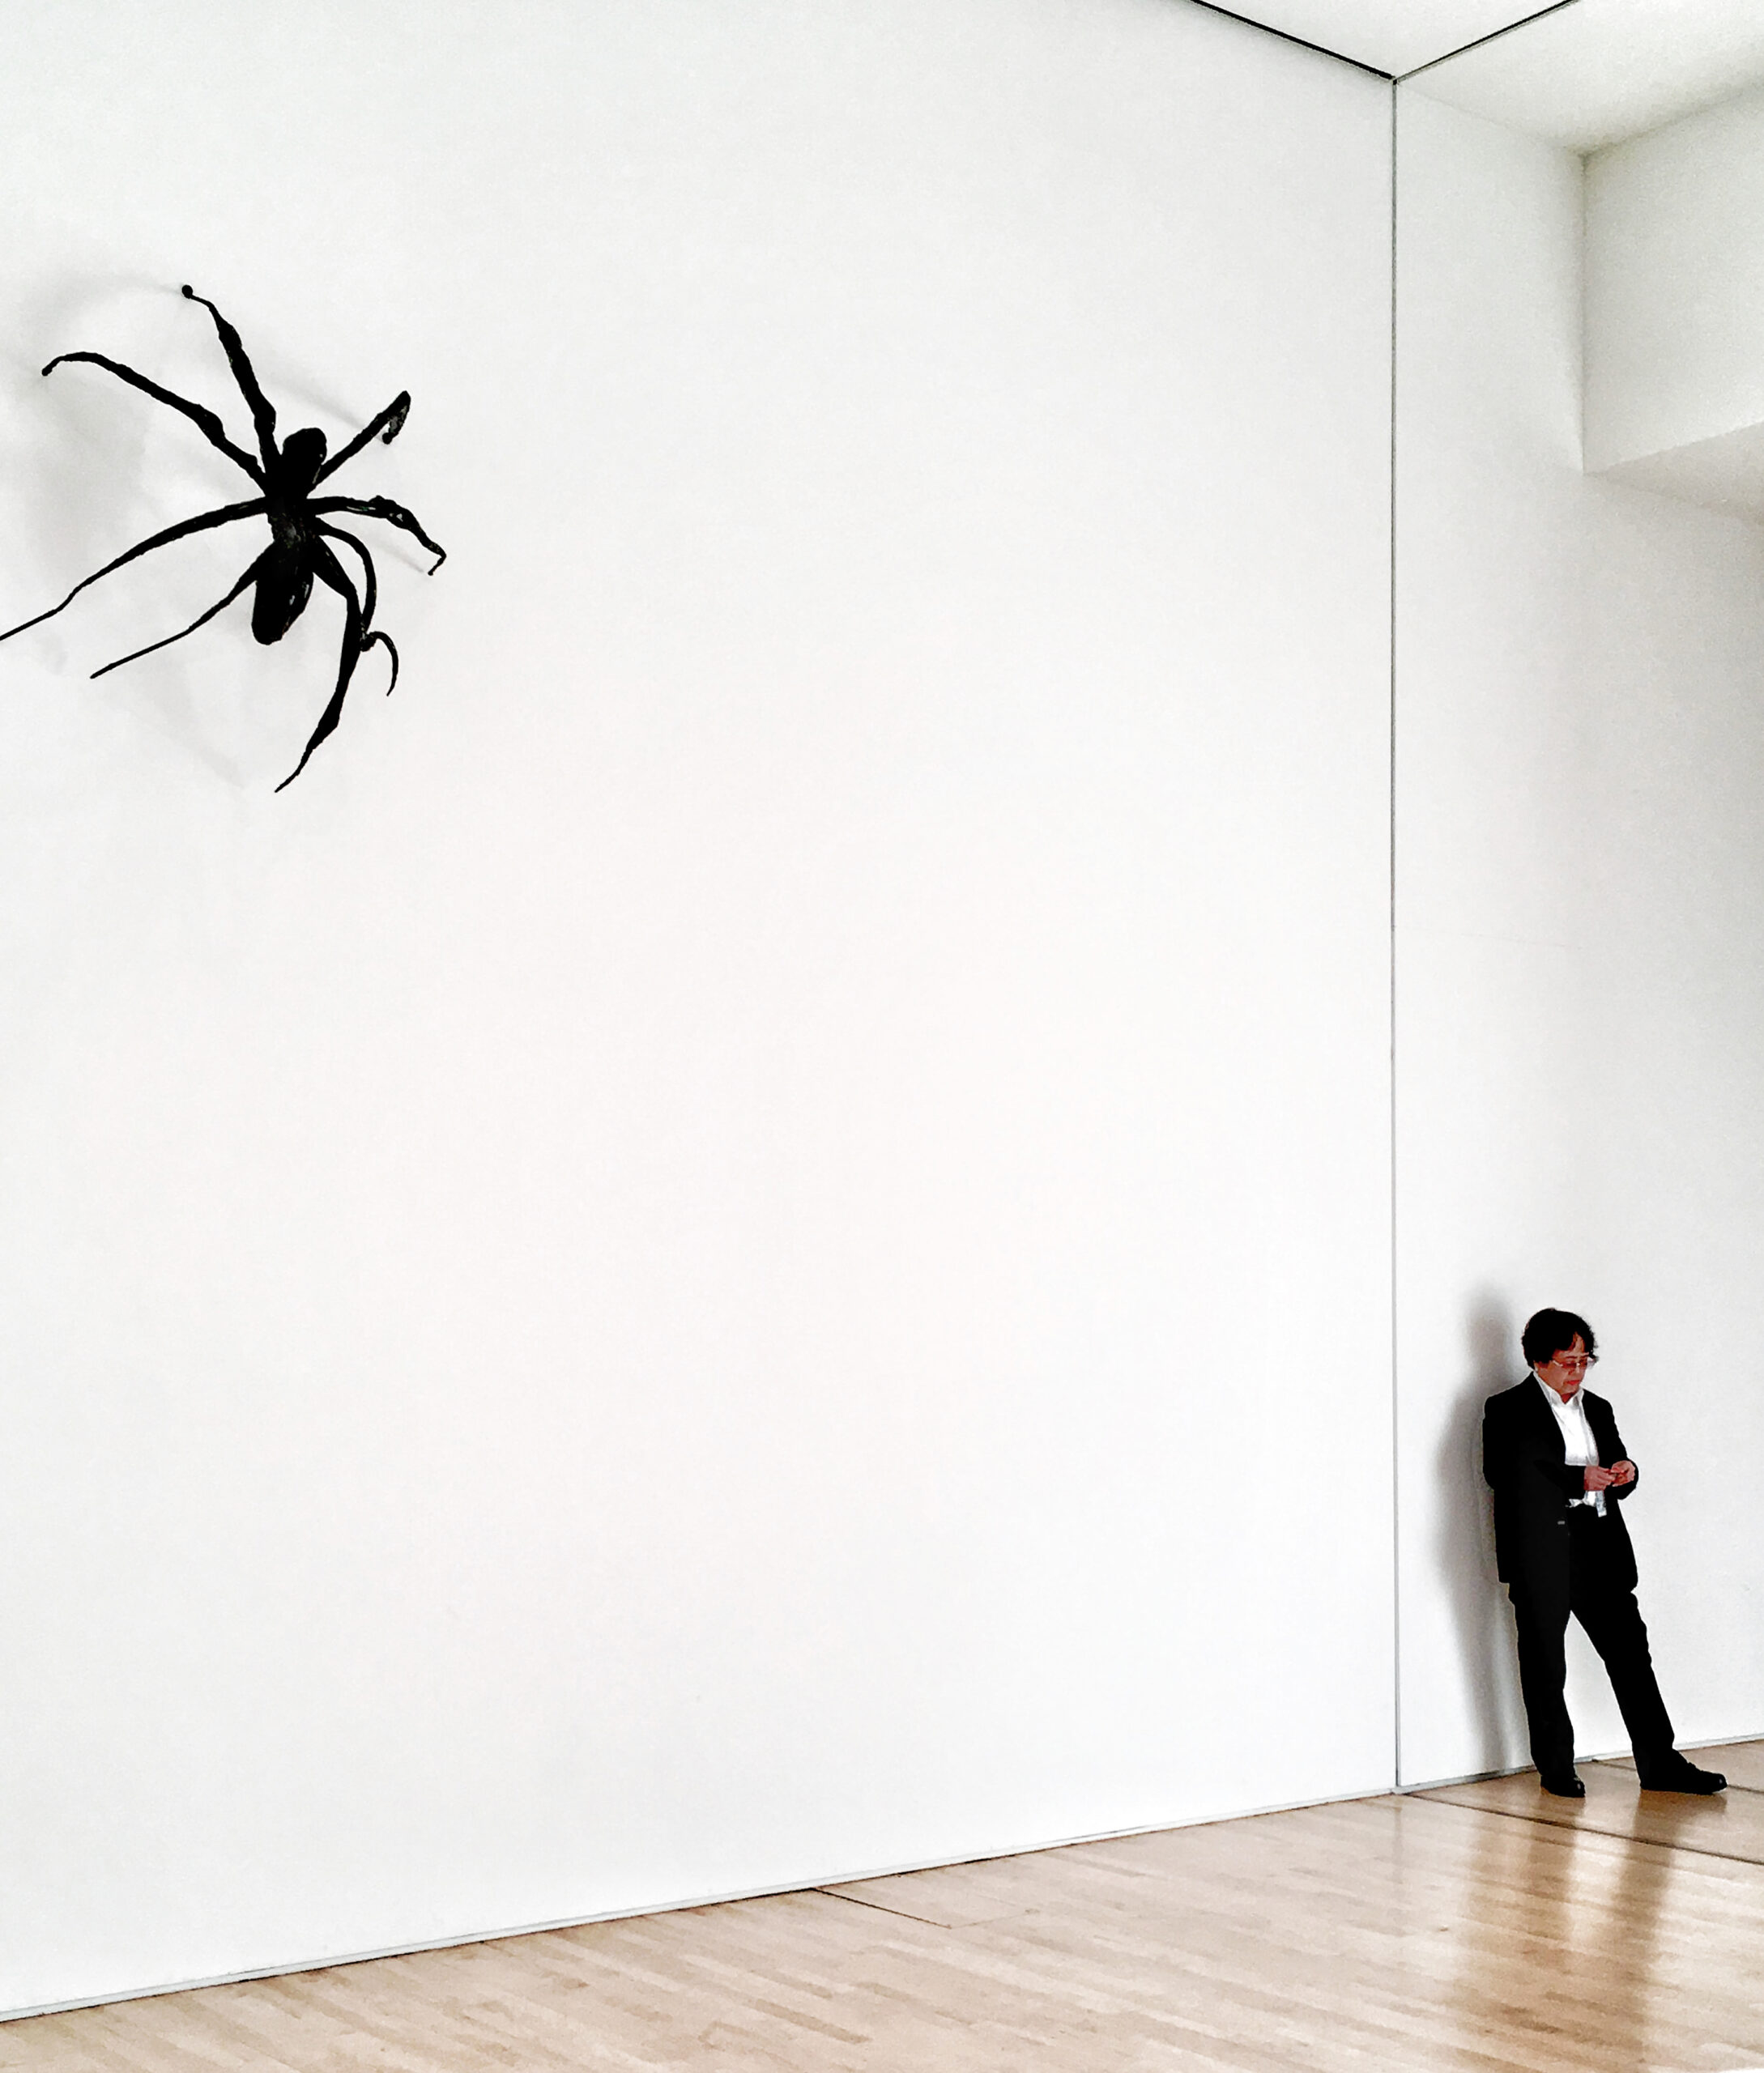 A man standing in front of a wall with a spider hanging from it.